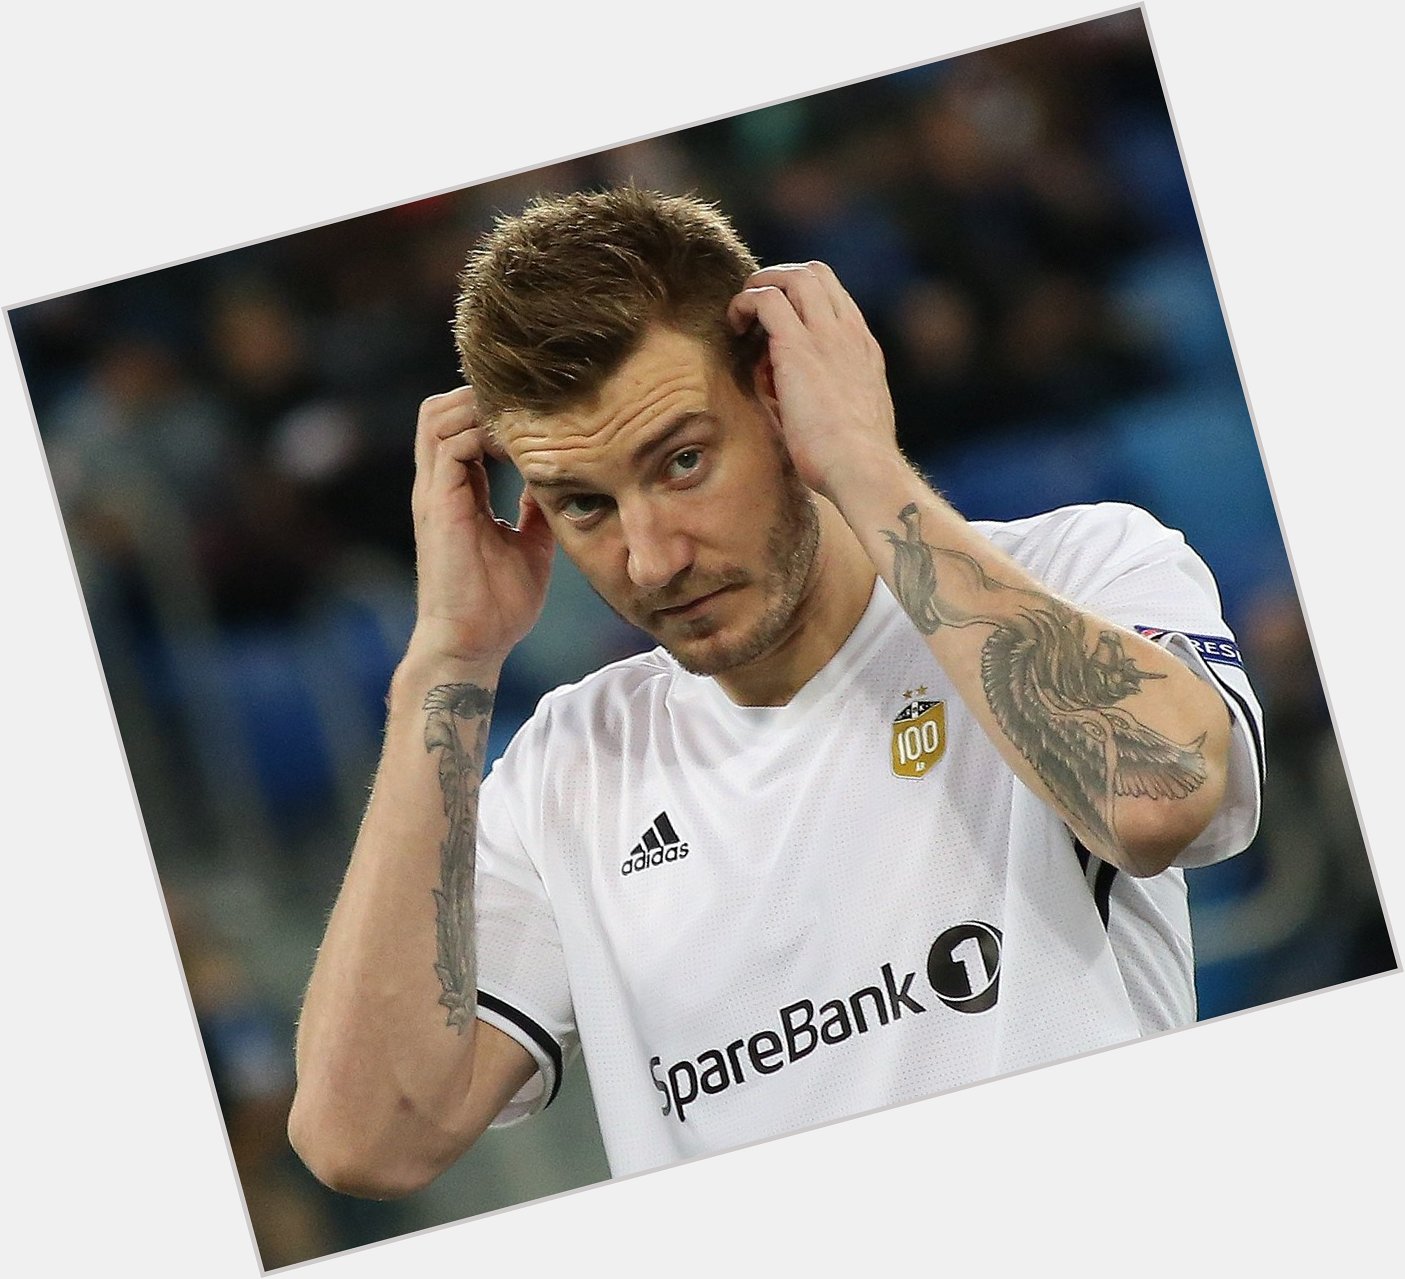 Happy 30th Birthday to this beautiful man...

The greatest player ever to grace the game. Lord Nicklas Bendtner!   